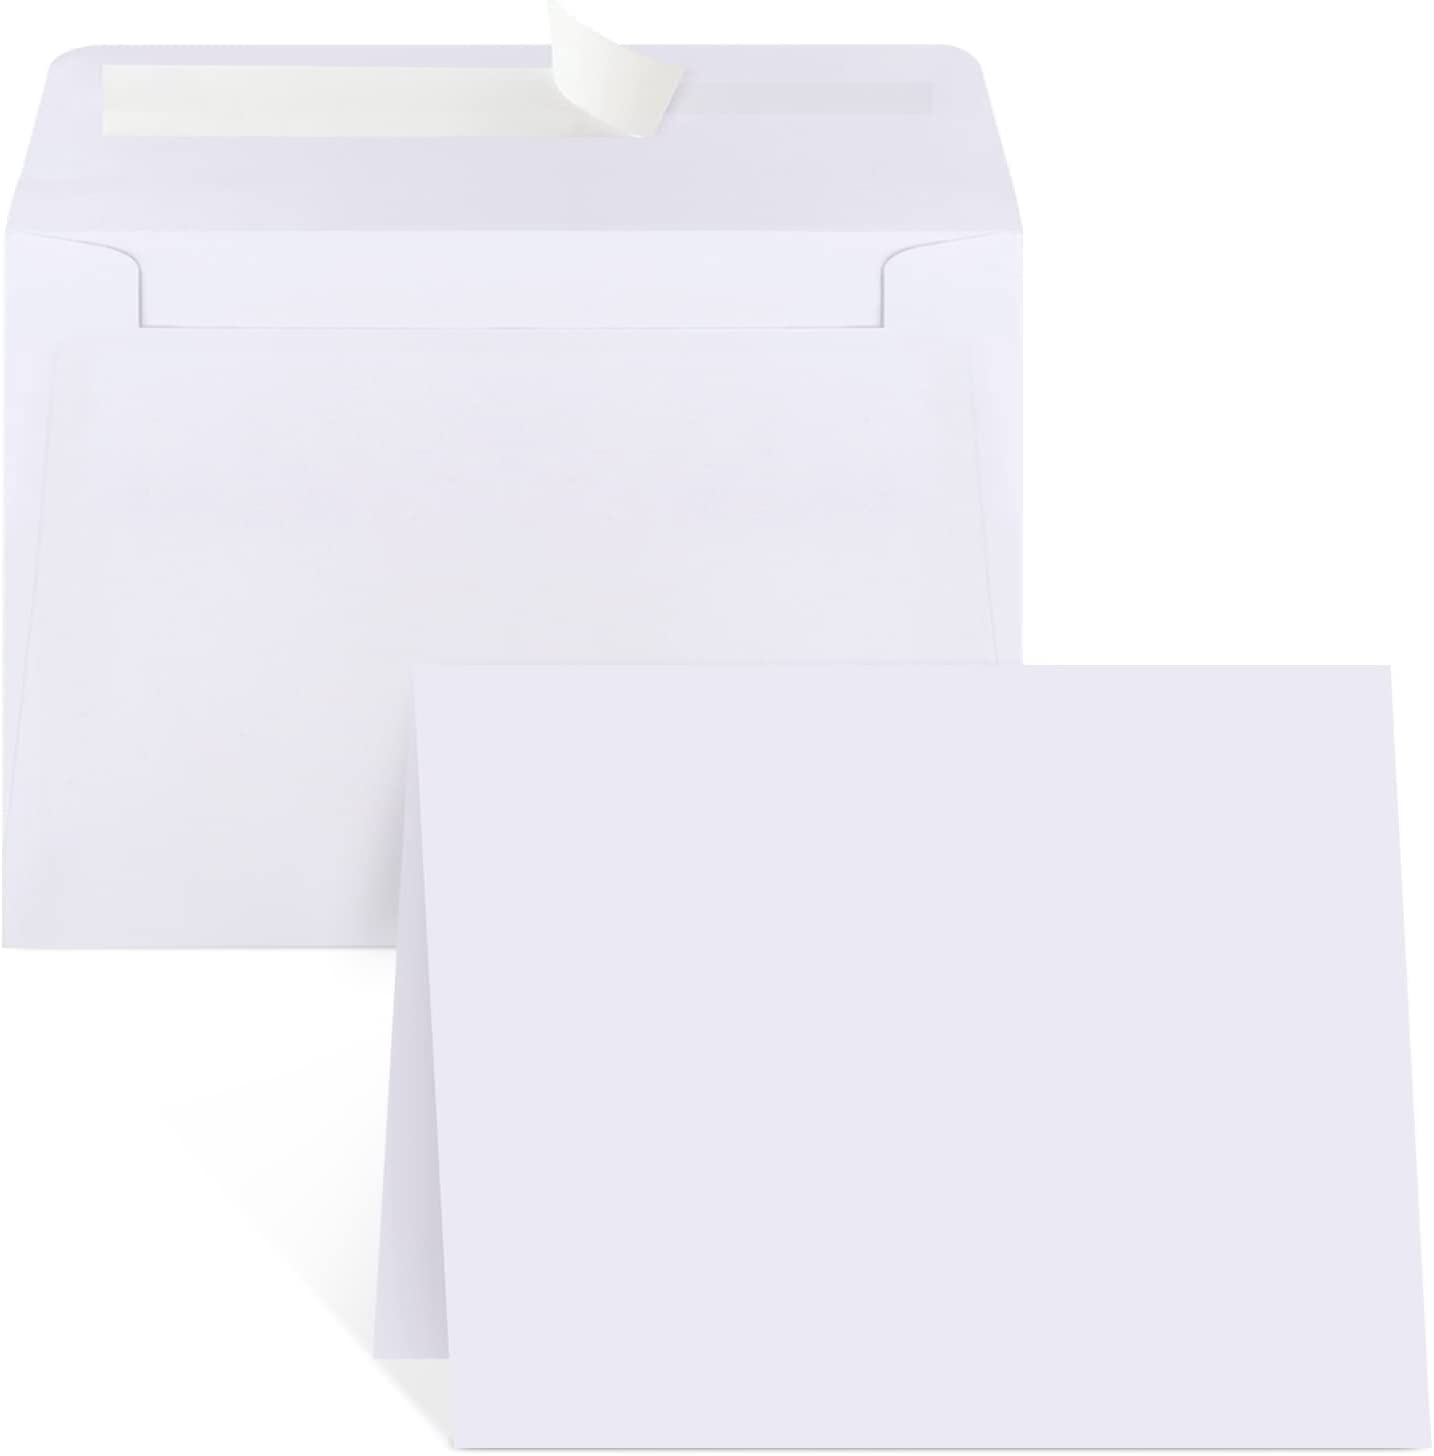  Blank Cards and Envelopes 4x6, 30 Pack Brown